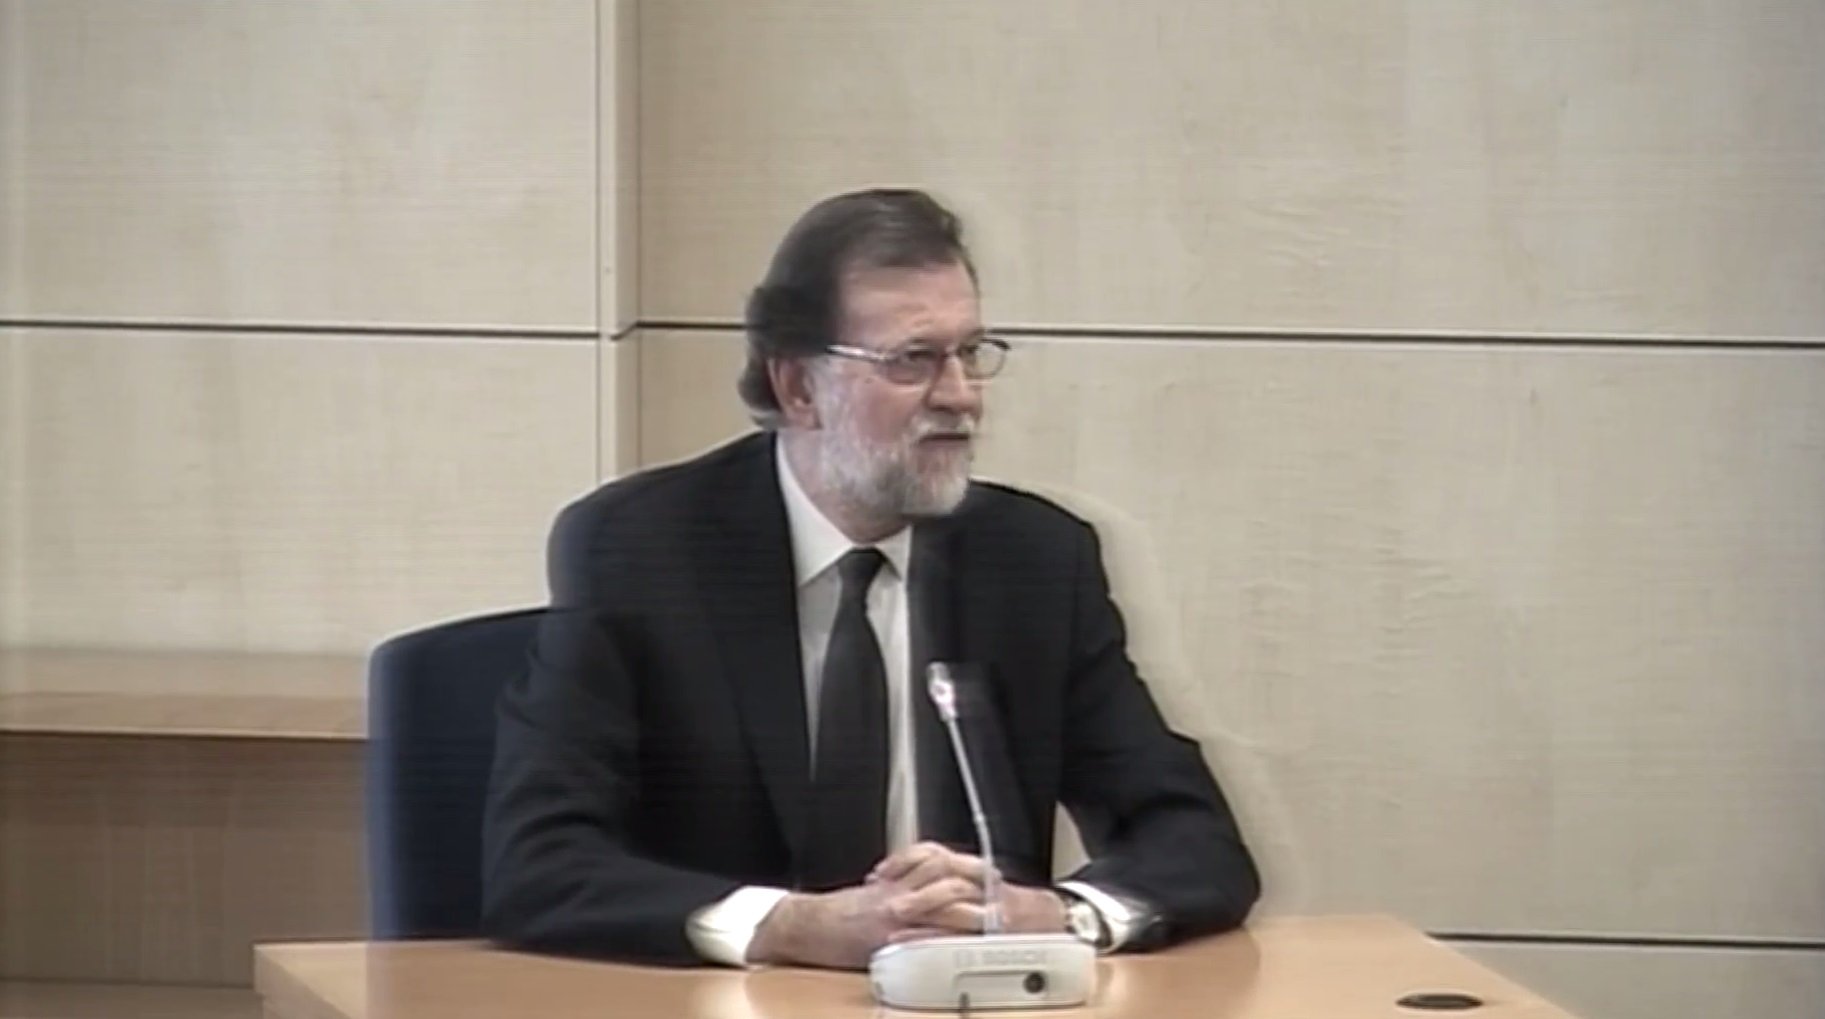 Court questions "credibility" of Mariano Rajoy's testimony